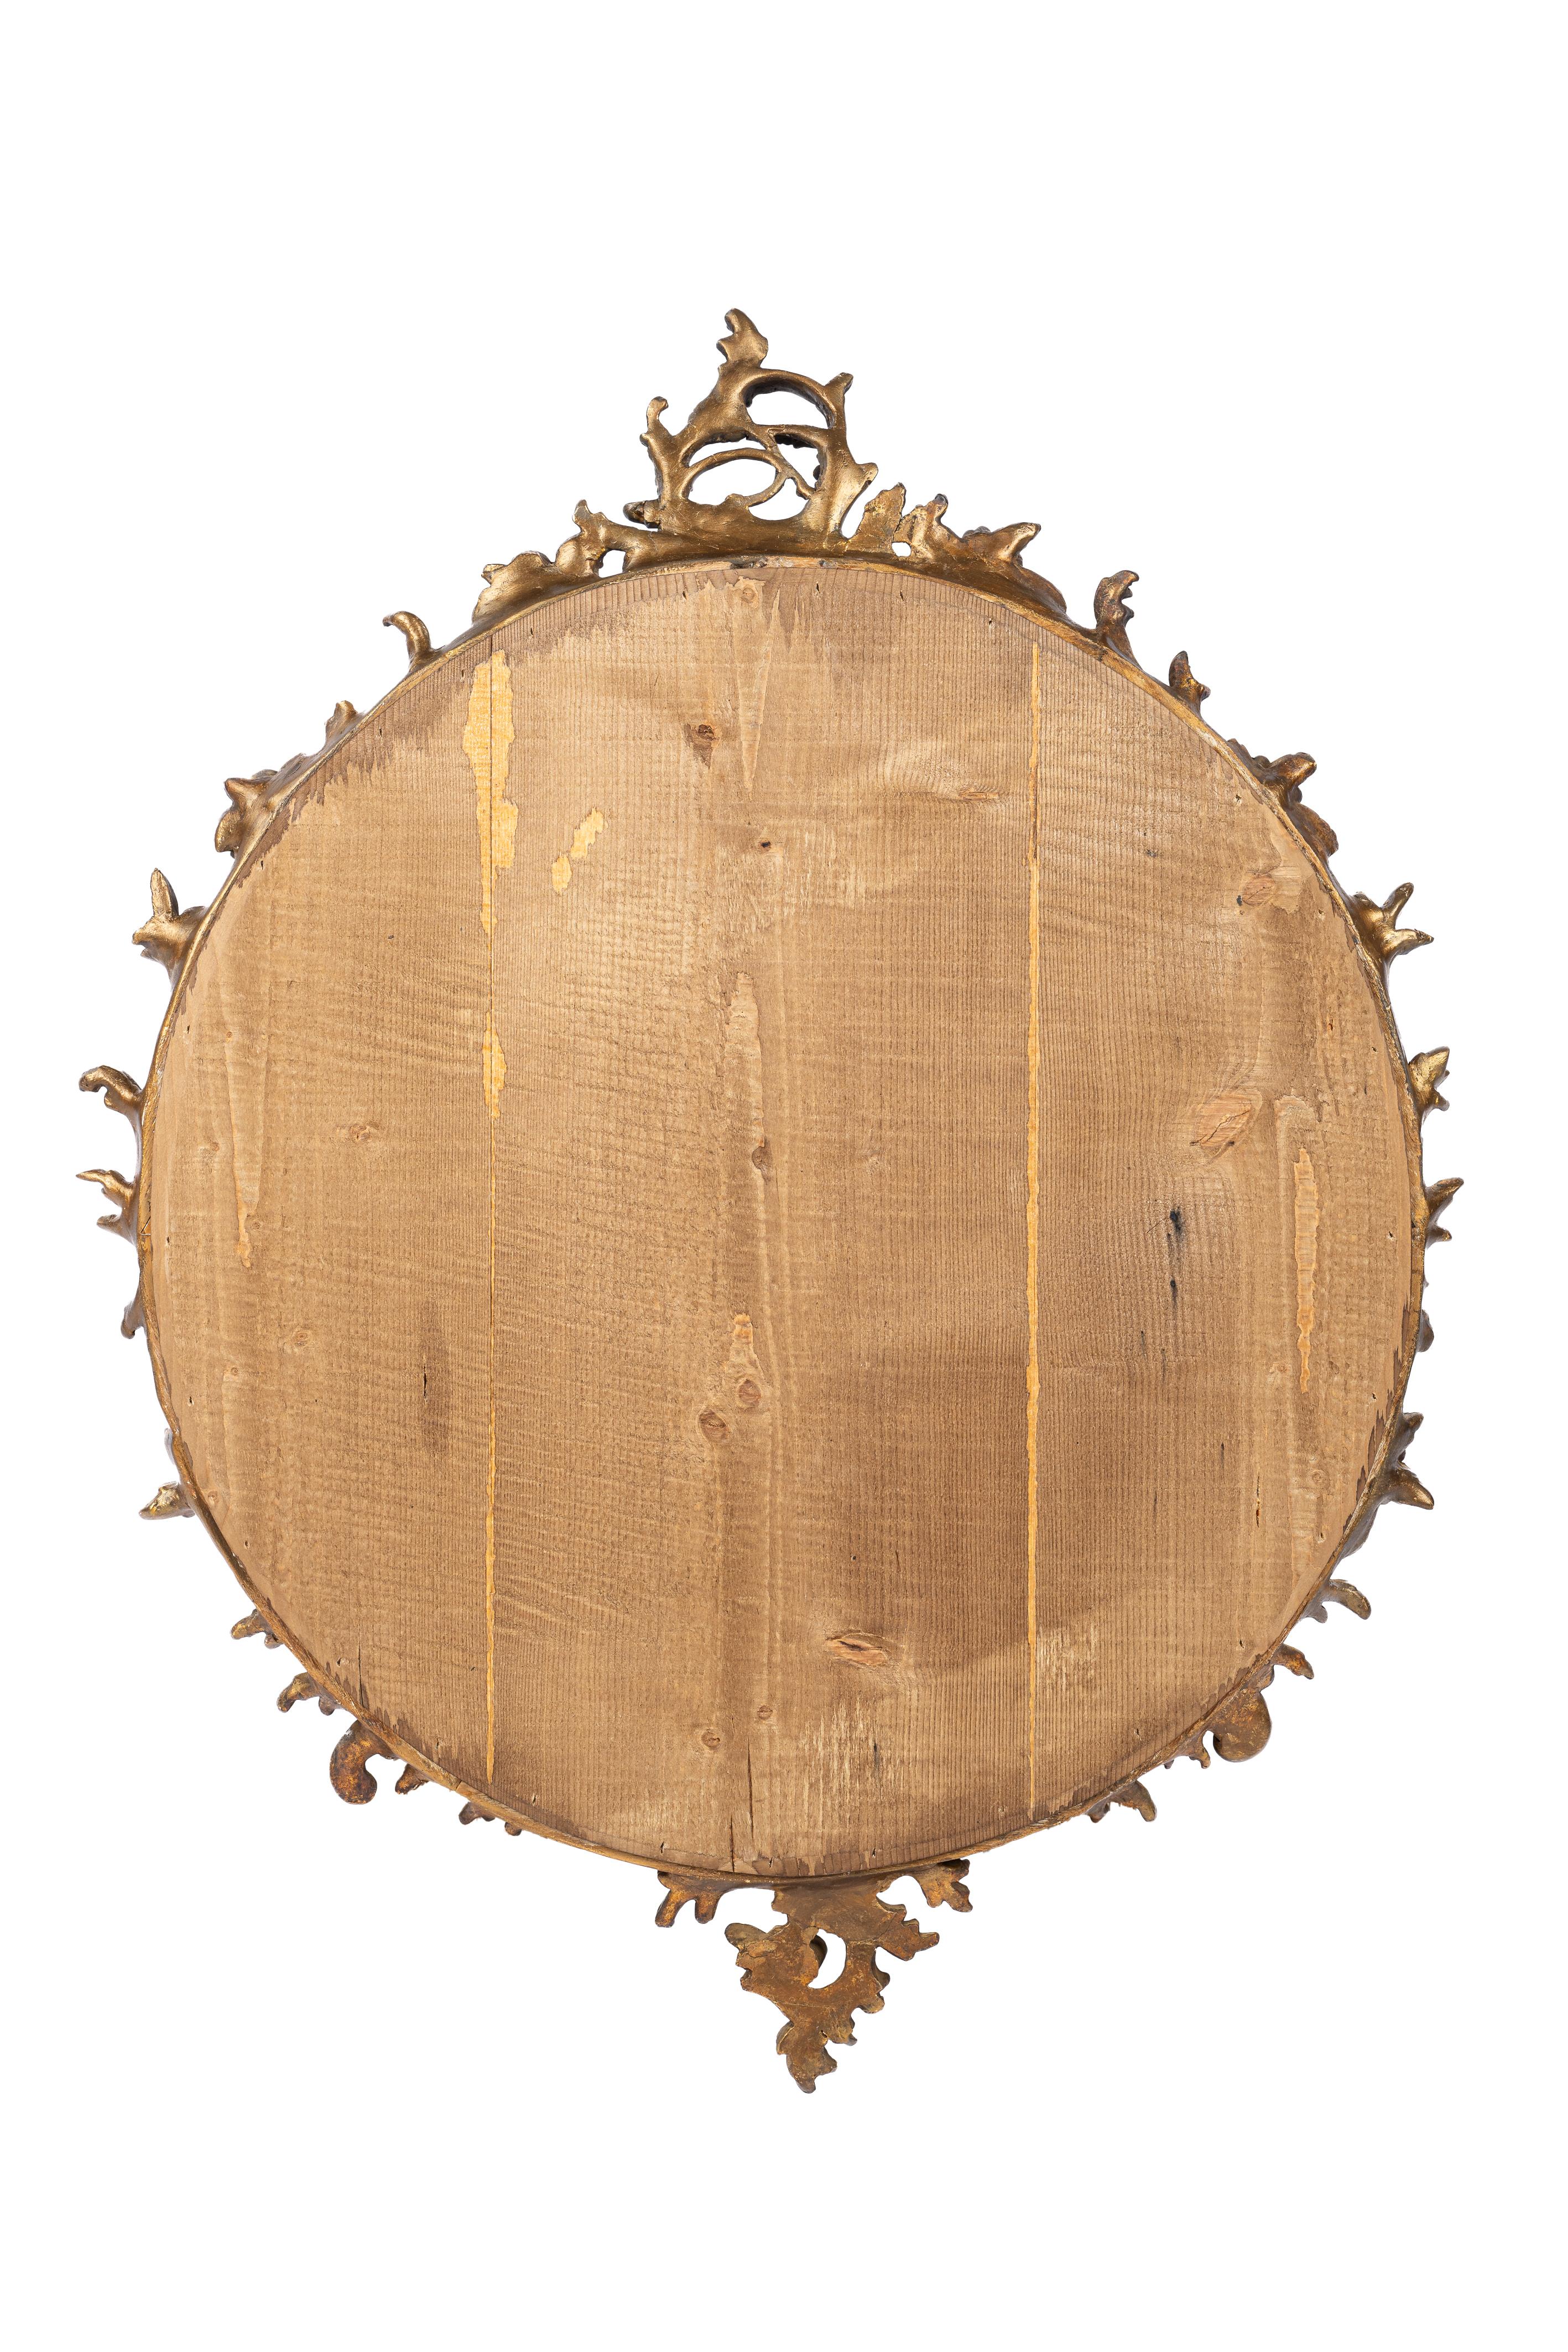 Antique 19th century round or circular gold leaf gilt French Rococo mirror For Sale 1